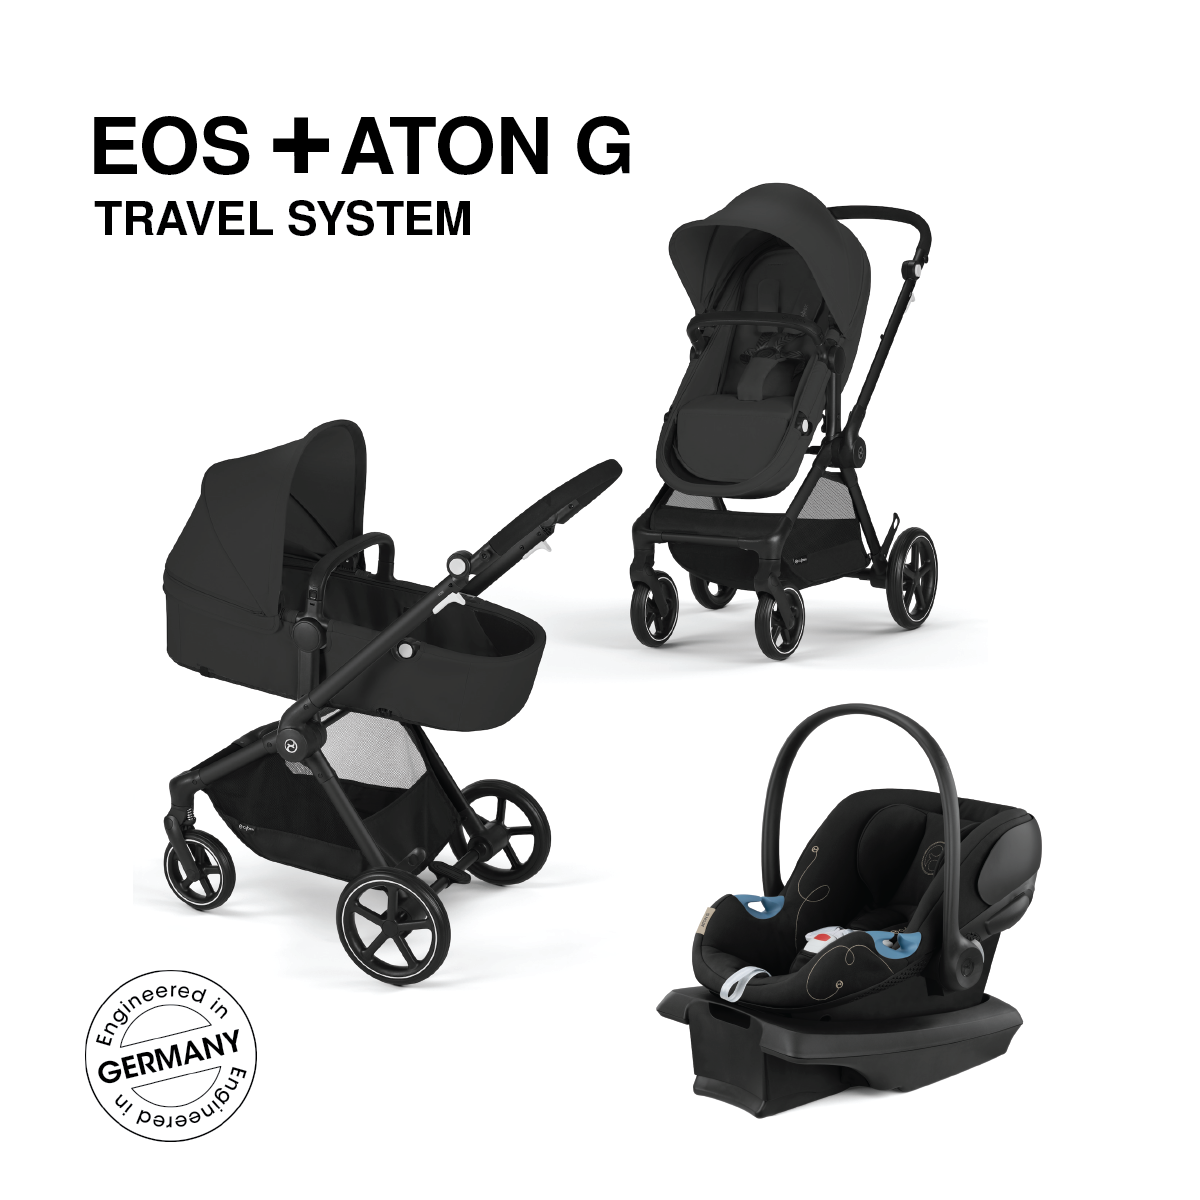 Maxi-cosi Zelia Luxe Travel System - New Hope Navy : Target